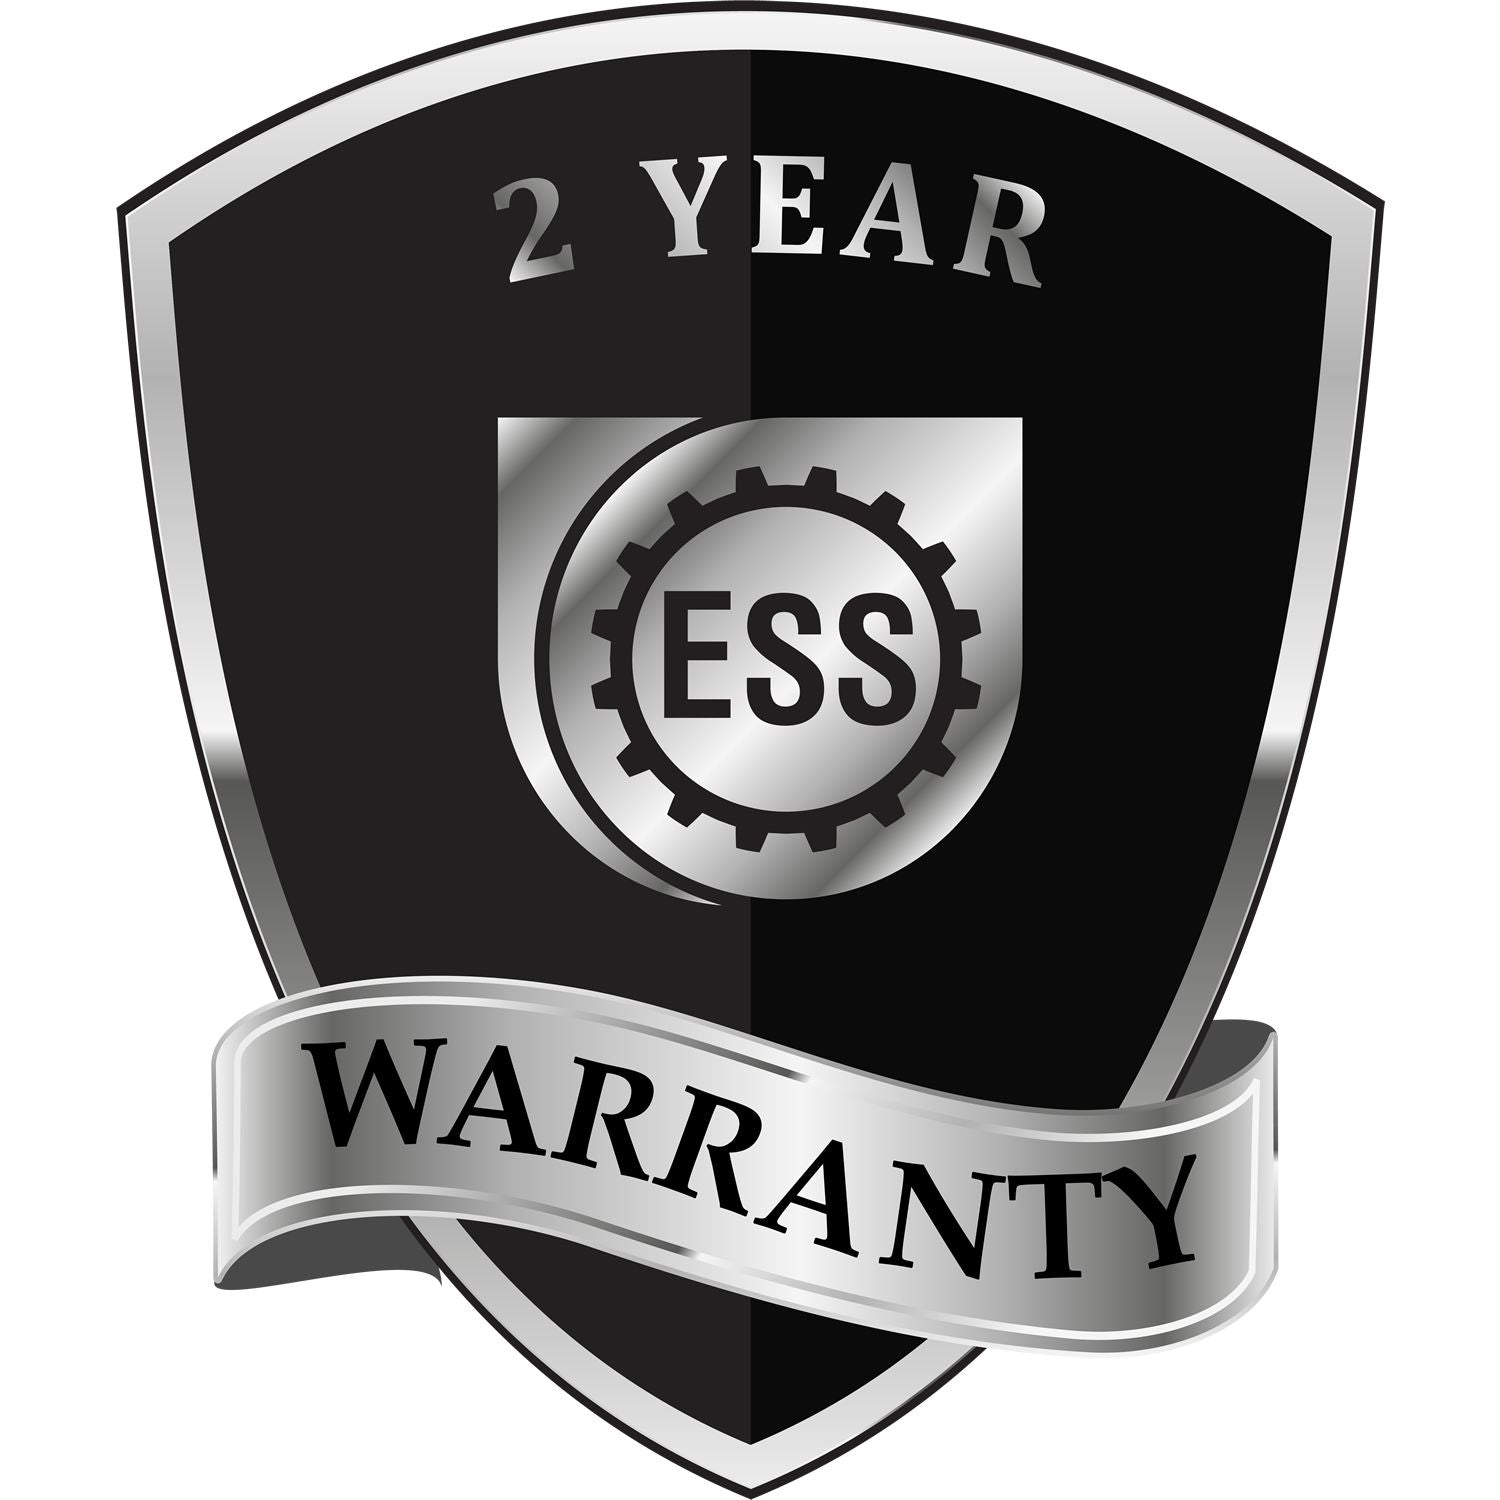 A badge or emblem showing a warranty icon for the Tennessee Desk Landscape Architectural Seal Embosser